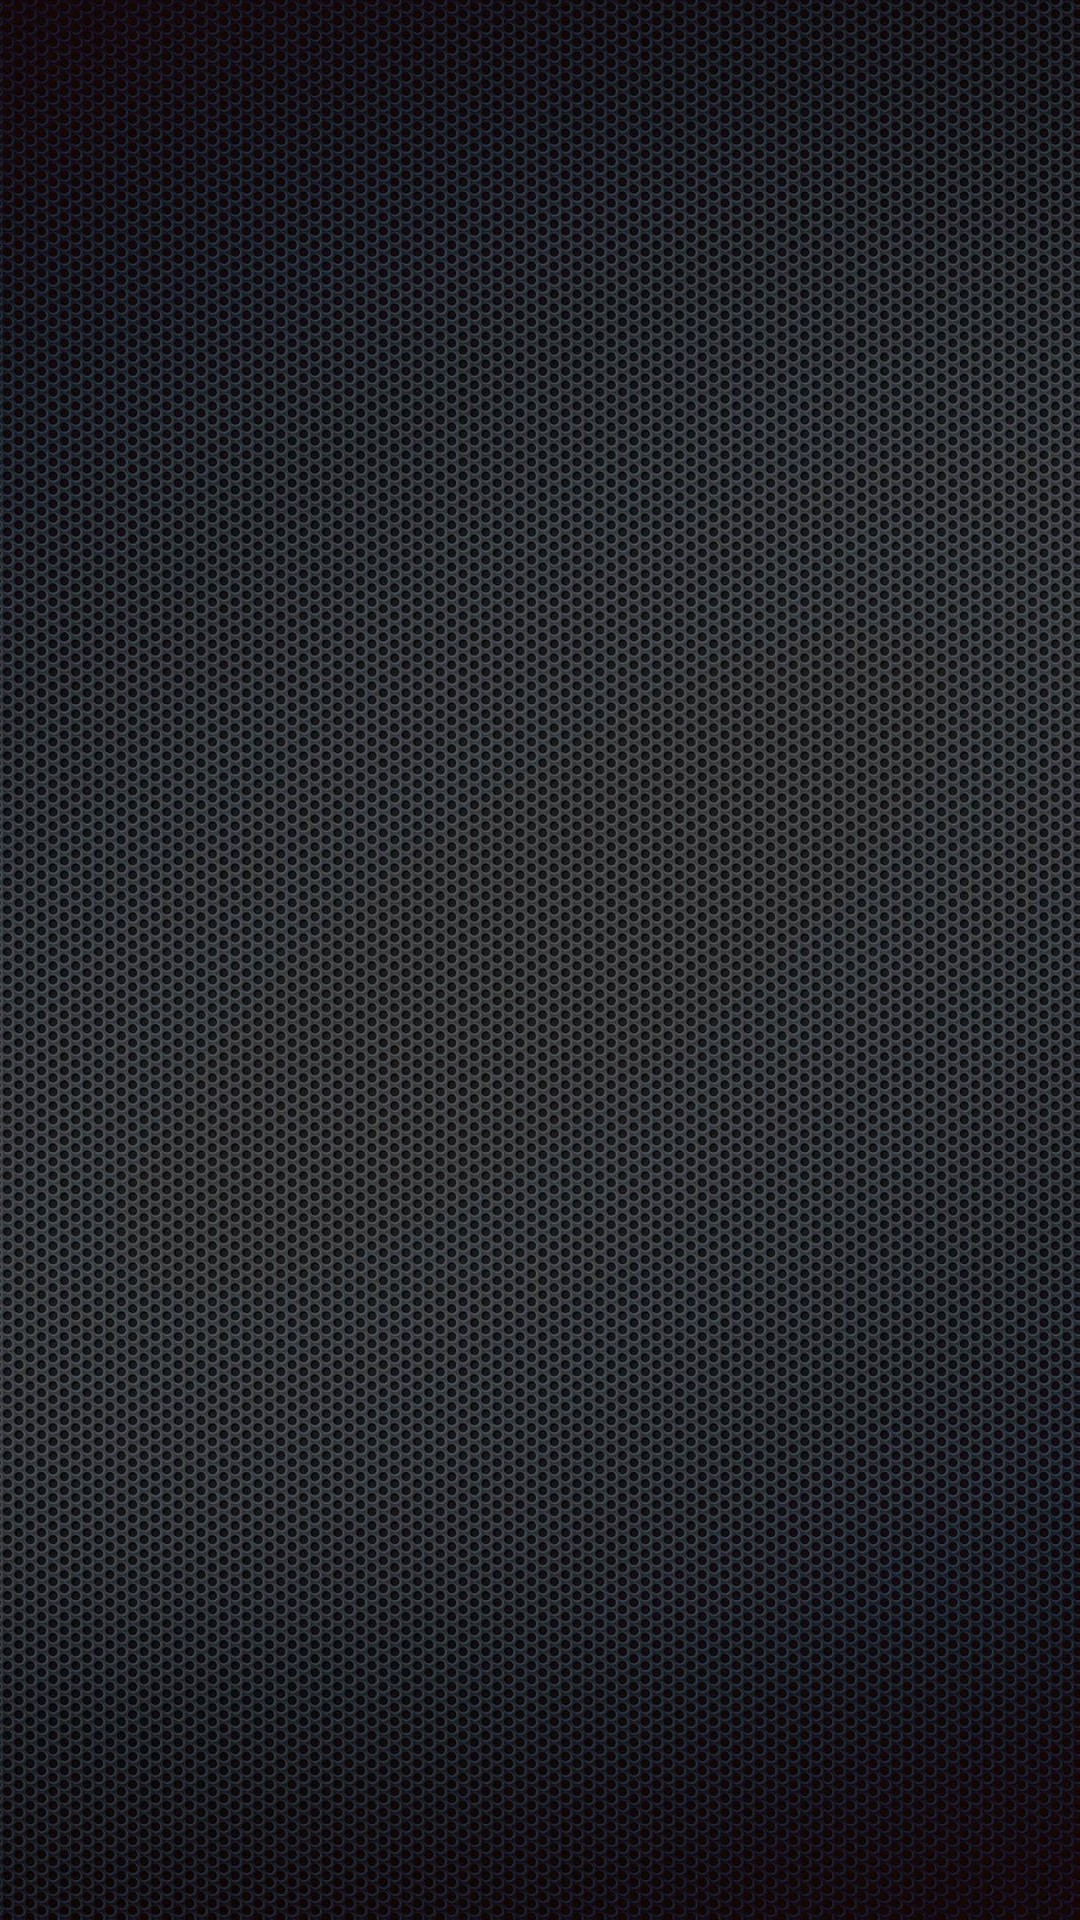 Black Grill Texture Wallpaper for SAMSUNG Galaxy S4